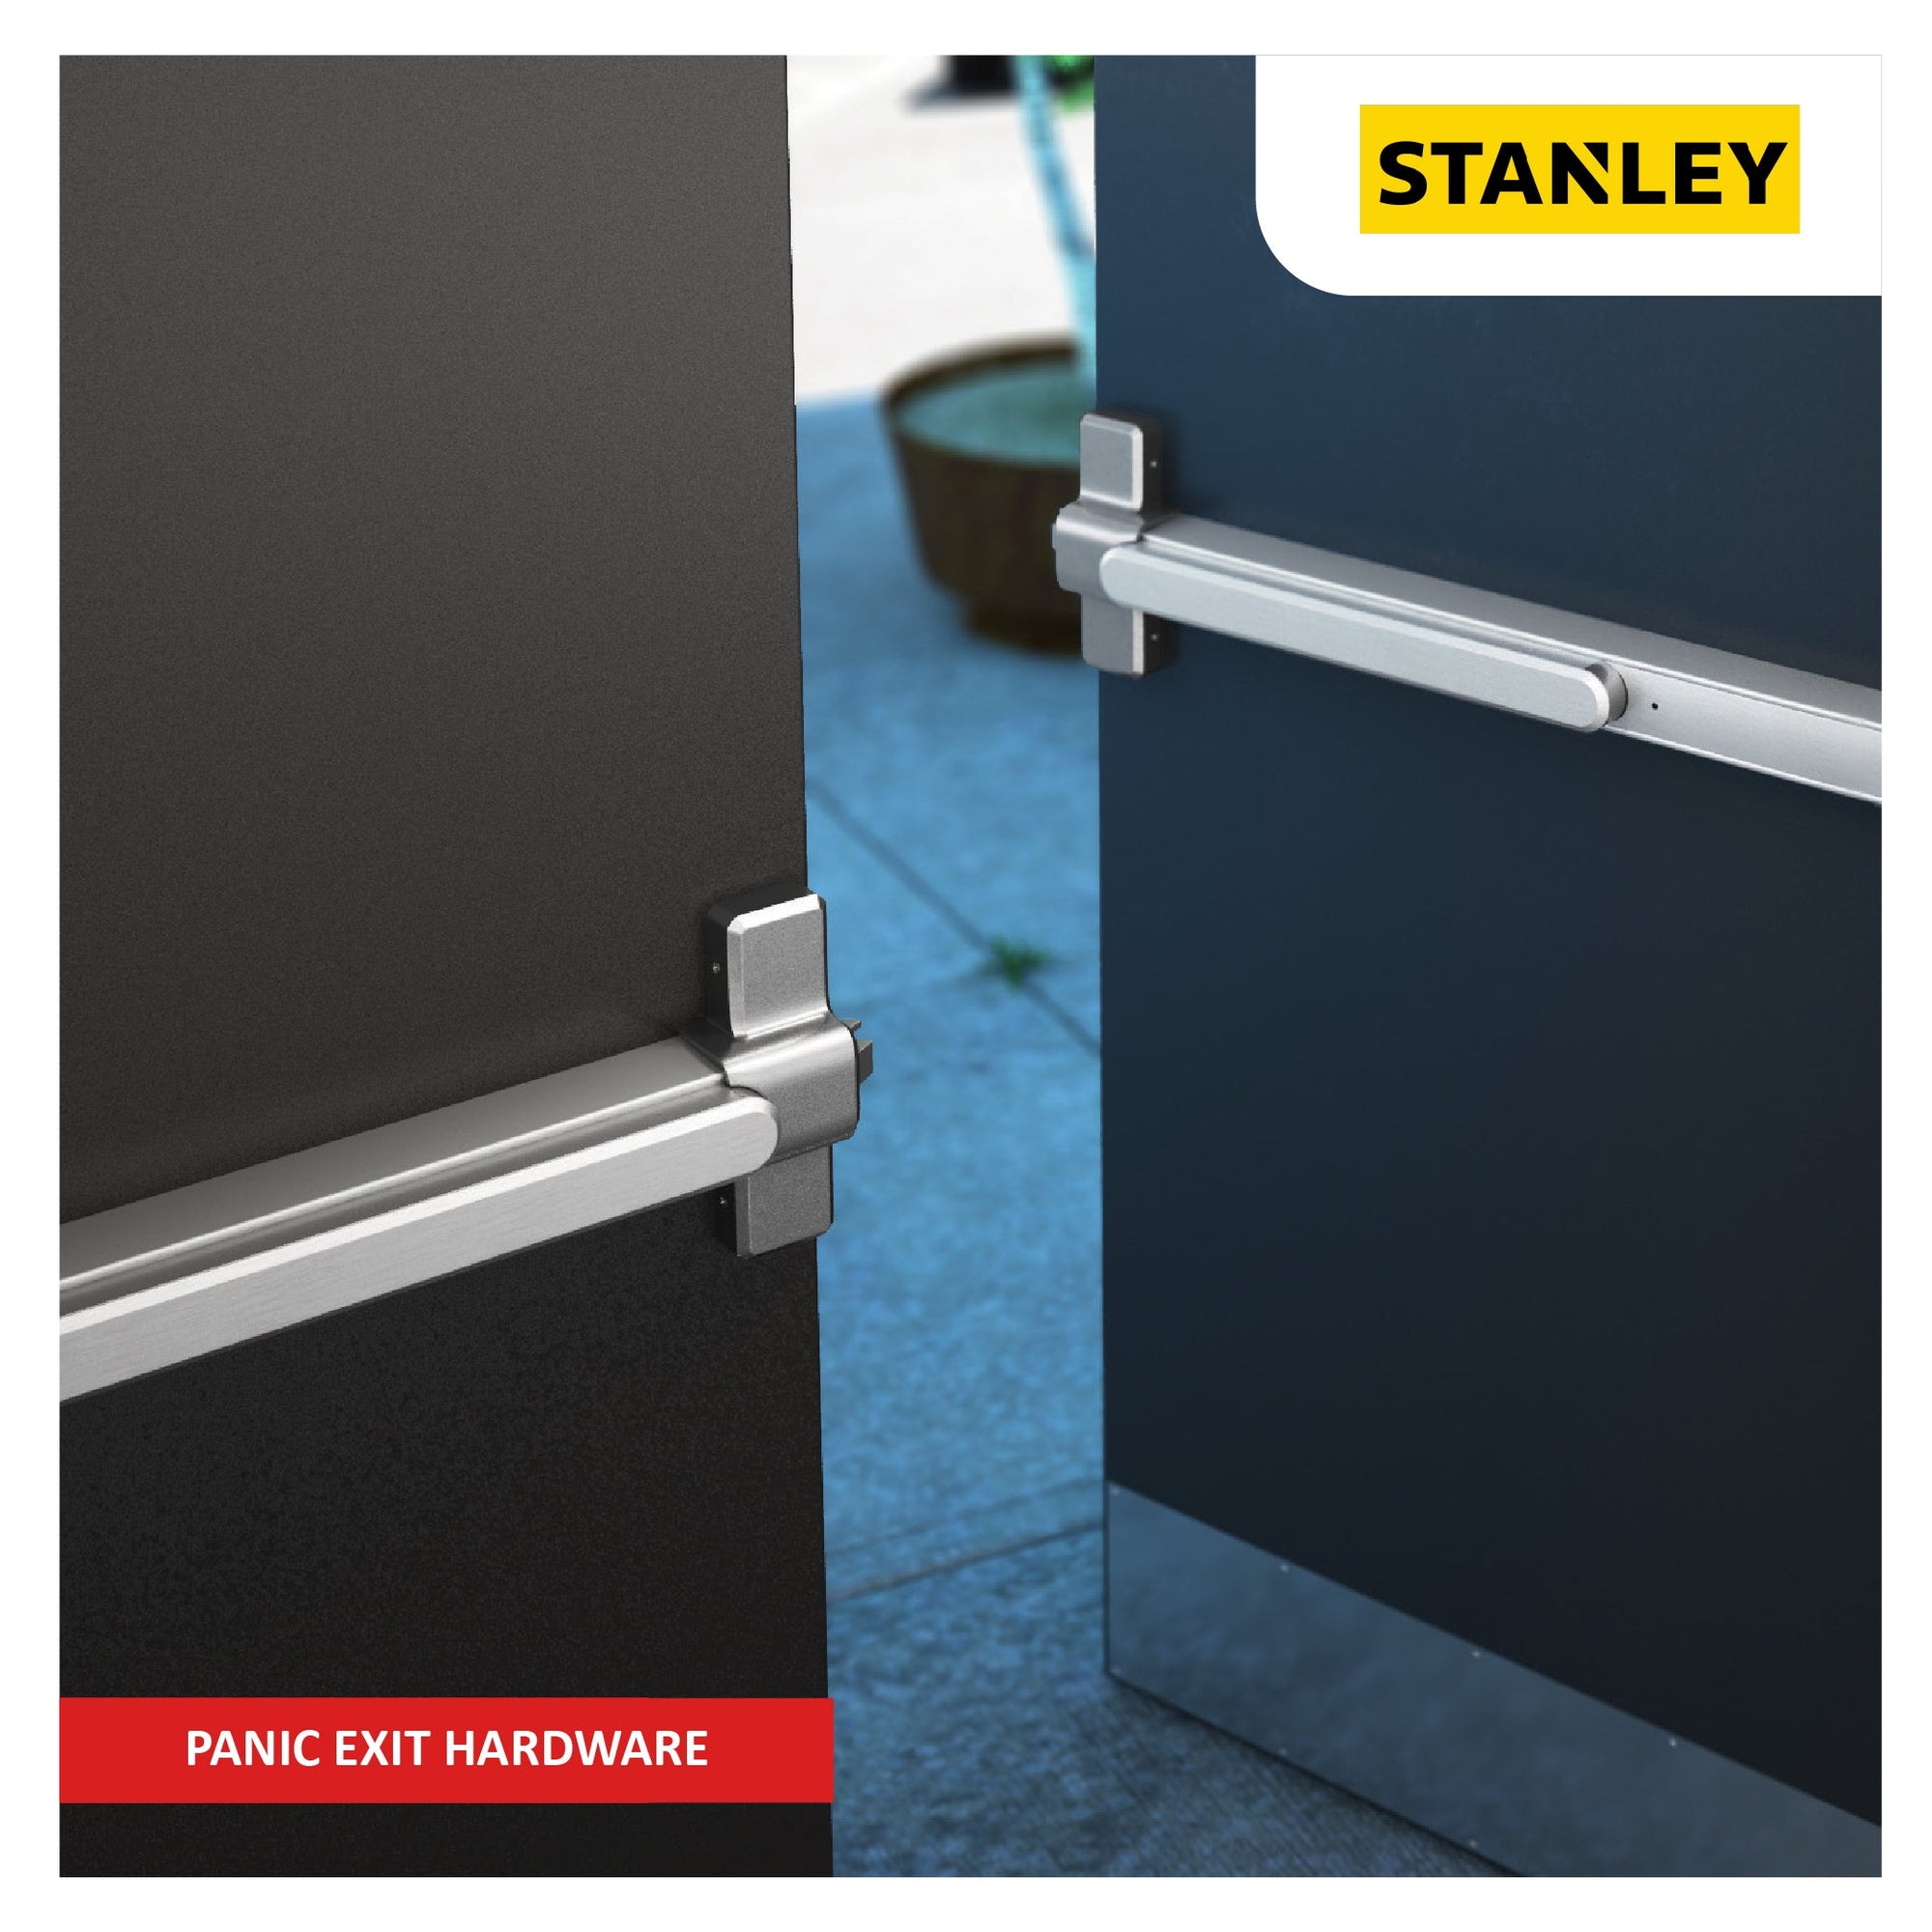 Stanley Panic Exit Hardware - High-quality panic exit devices for secure and efficient emergency exits - M. M. Noorbhoy & Co Collection